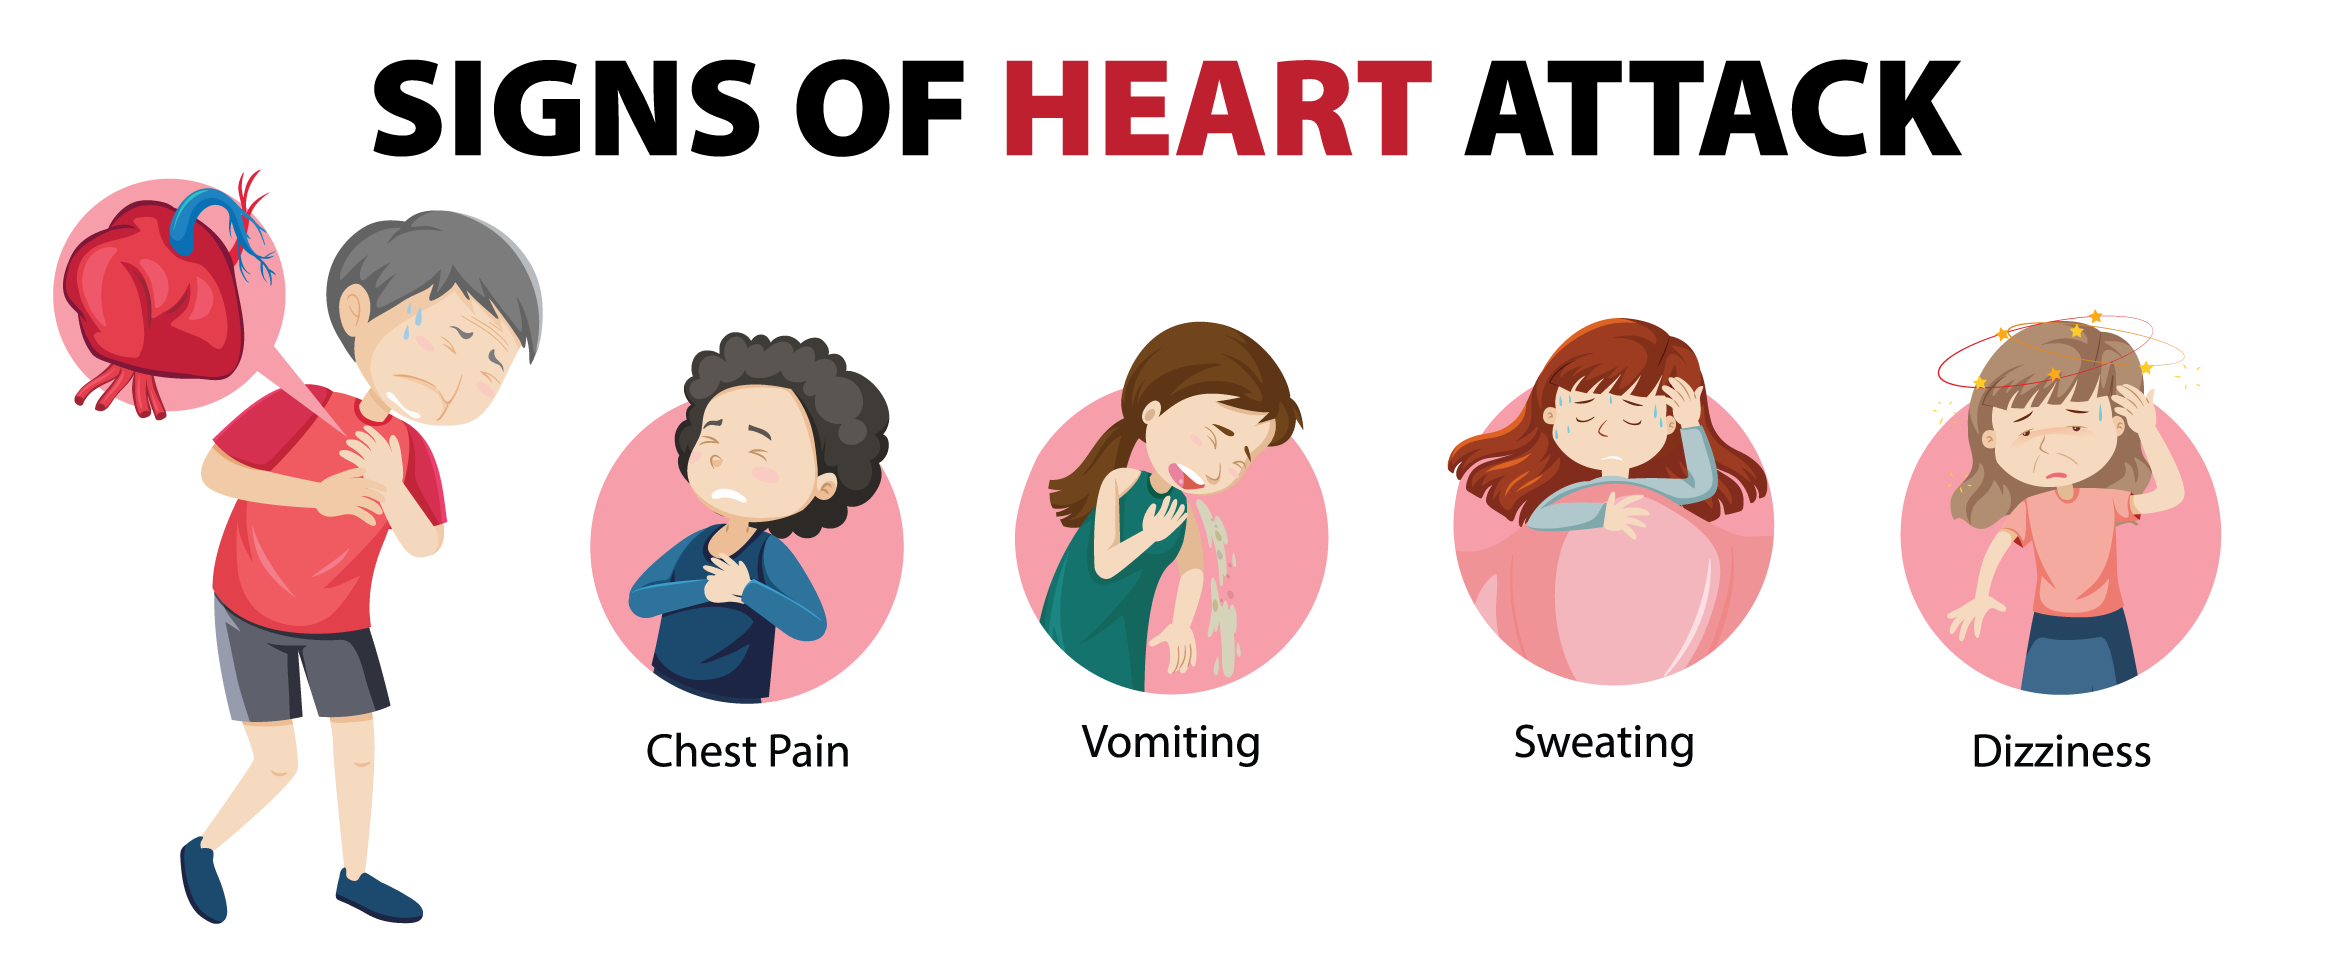 Signs of Heart Attack